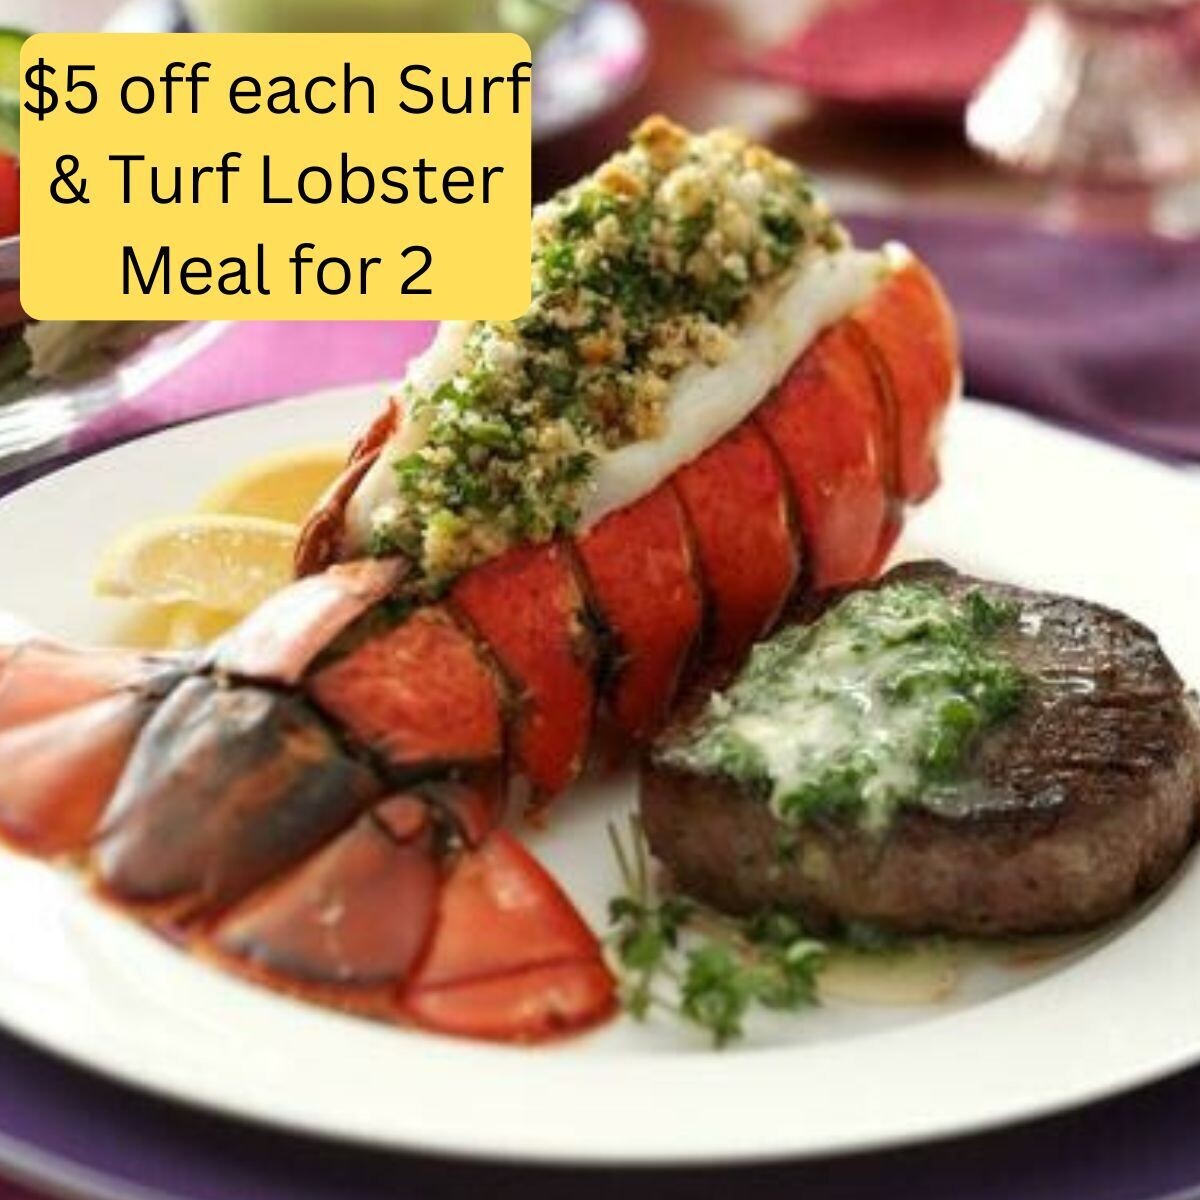 Surf & Turf Lobster Tail Meal Kit for 2!     $5 off